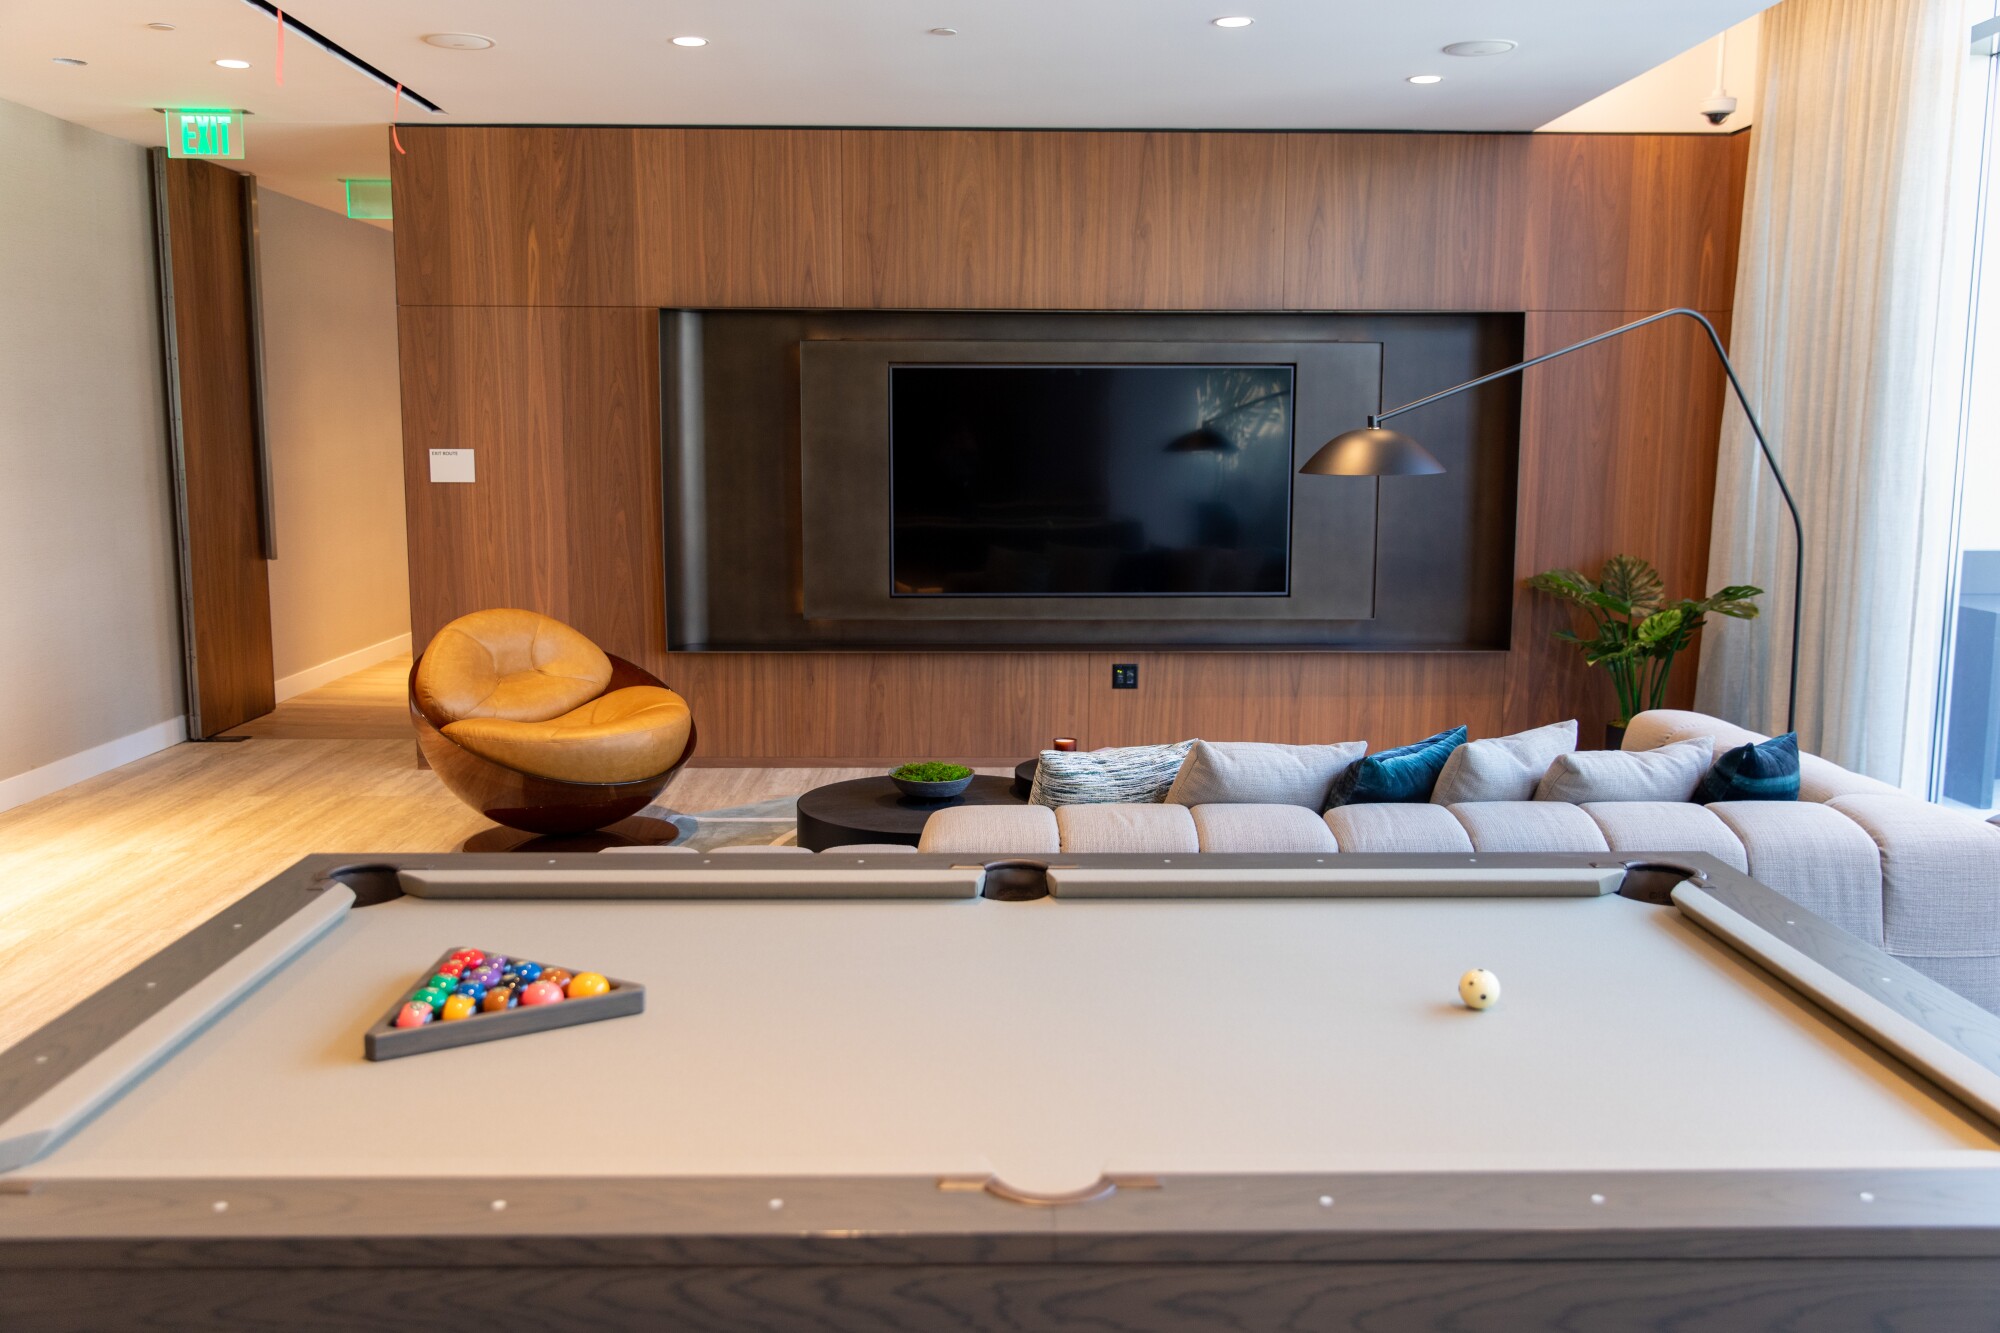 The Grand Lounge bar and theater features a custom billiards table and 85